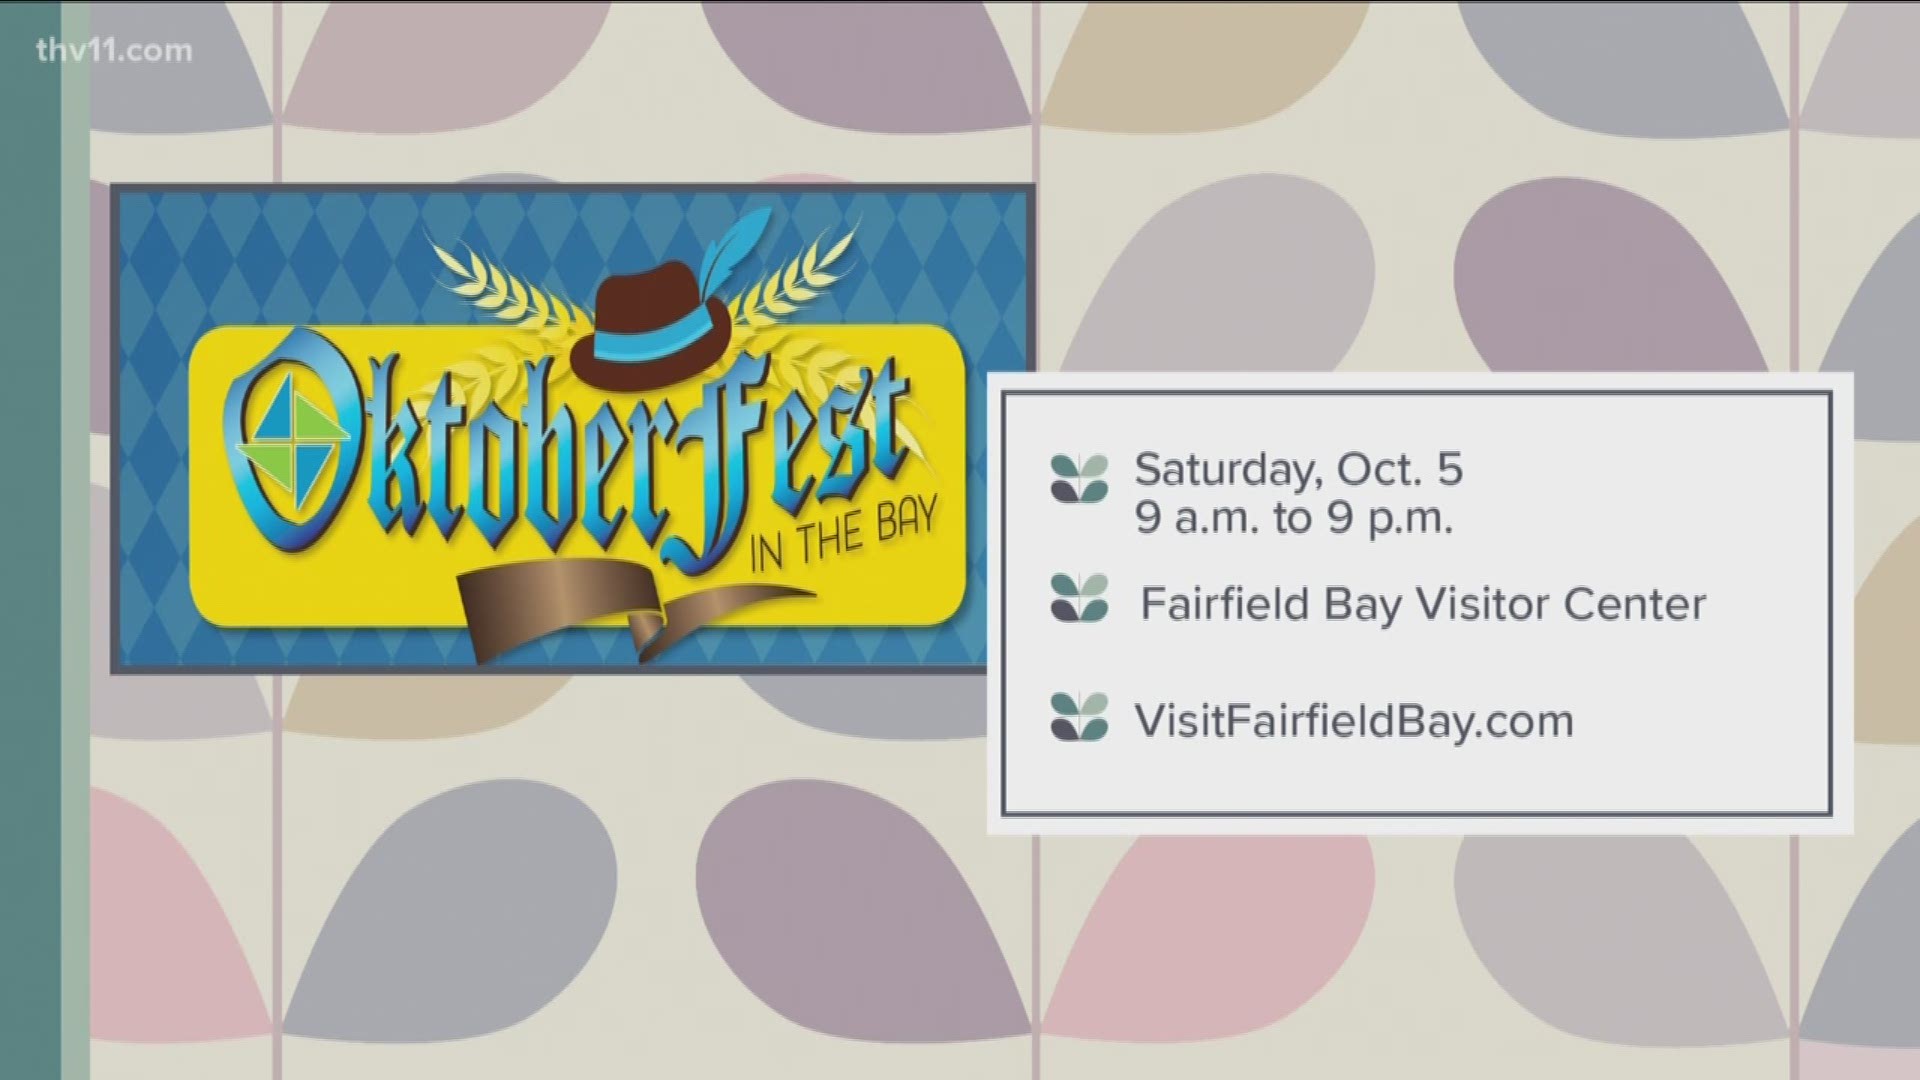 Fairfield Bay is rolling out the barrel this weekend with the 5th Annual Oktoberfest at the Bay.